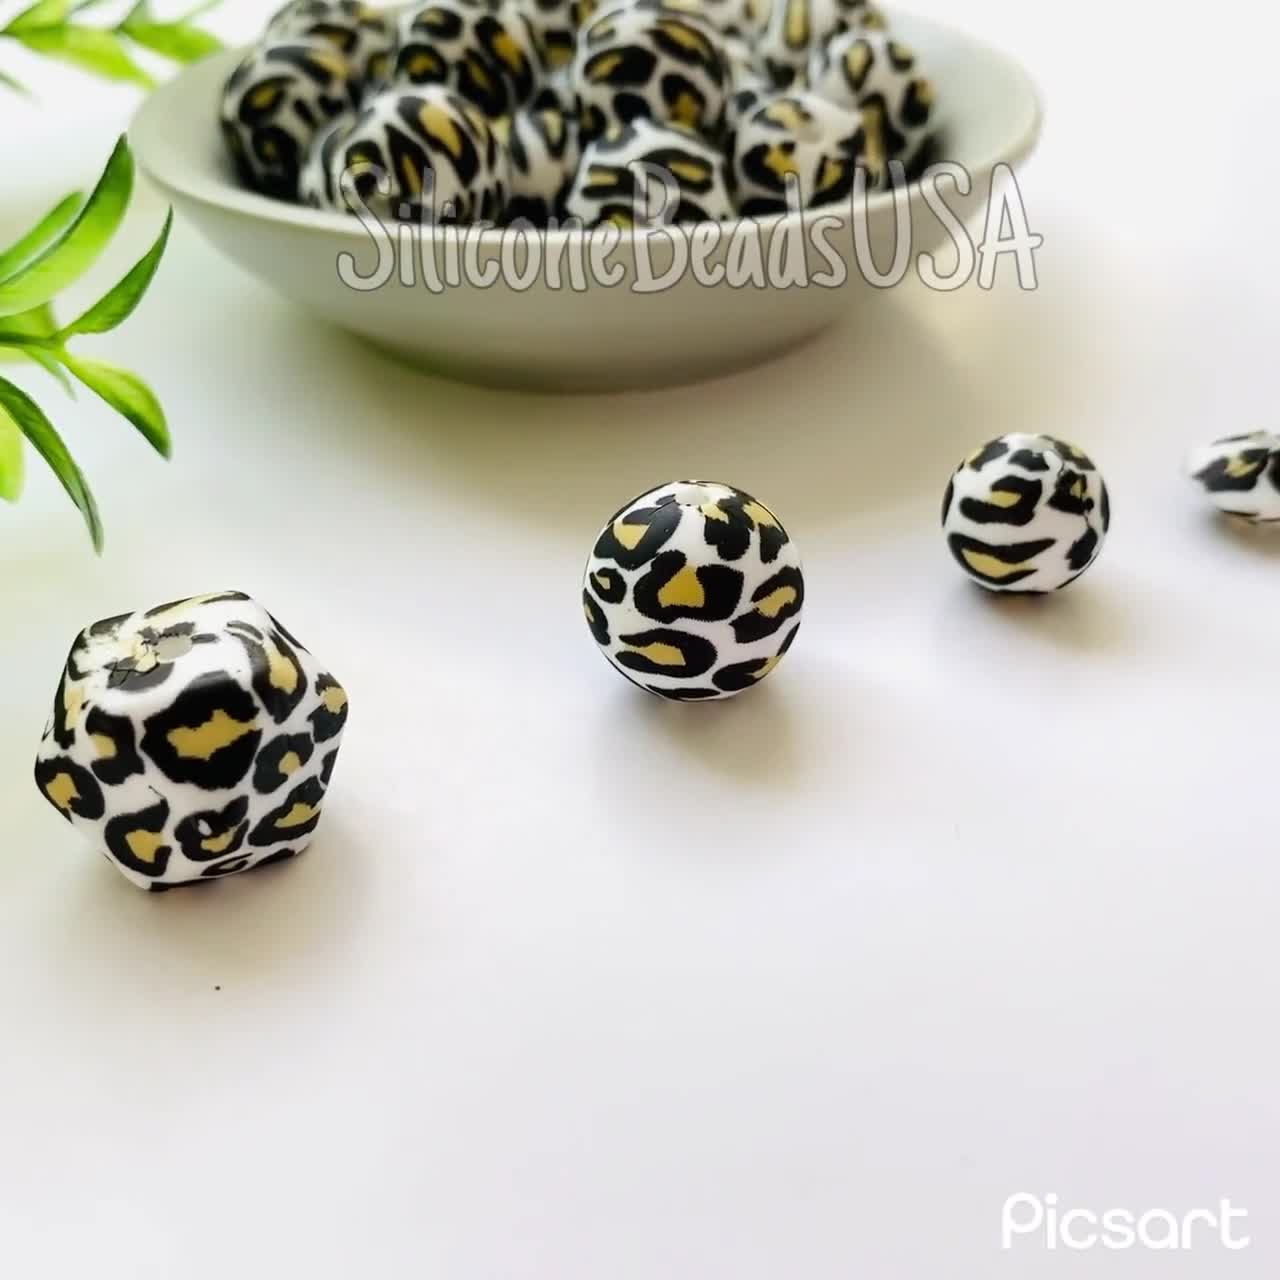 WHITE spotted leopard • cheetah • round silicone beads • 15 mm • silicone  beads • animal print • loose sensory bead • pen for beads lanyard